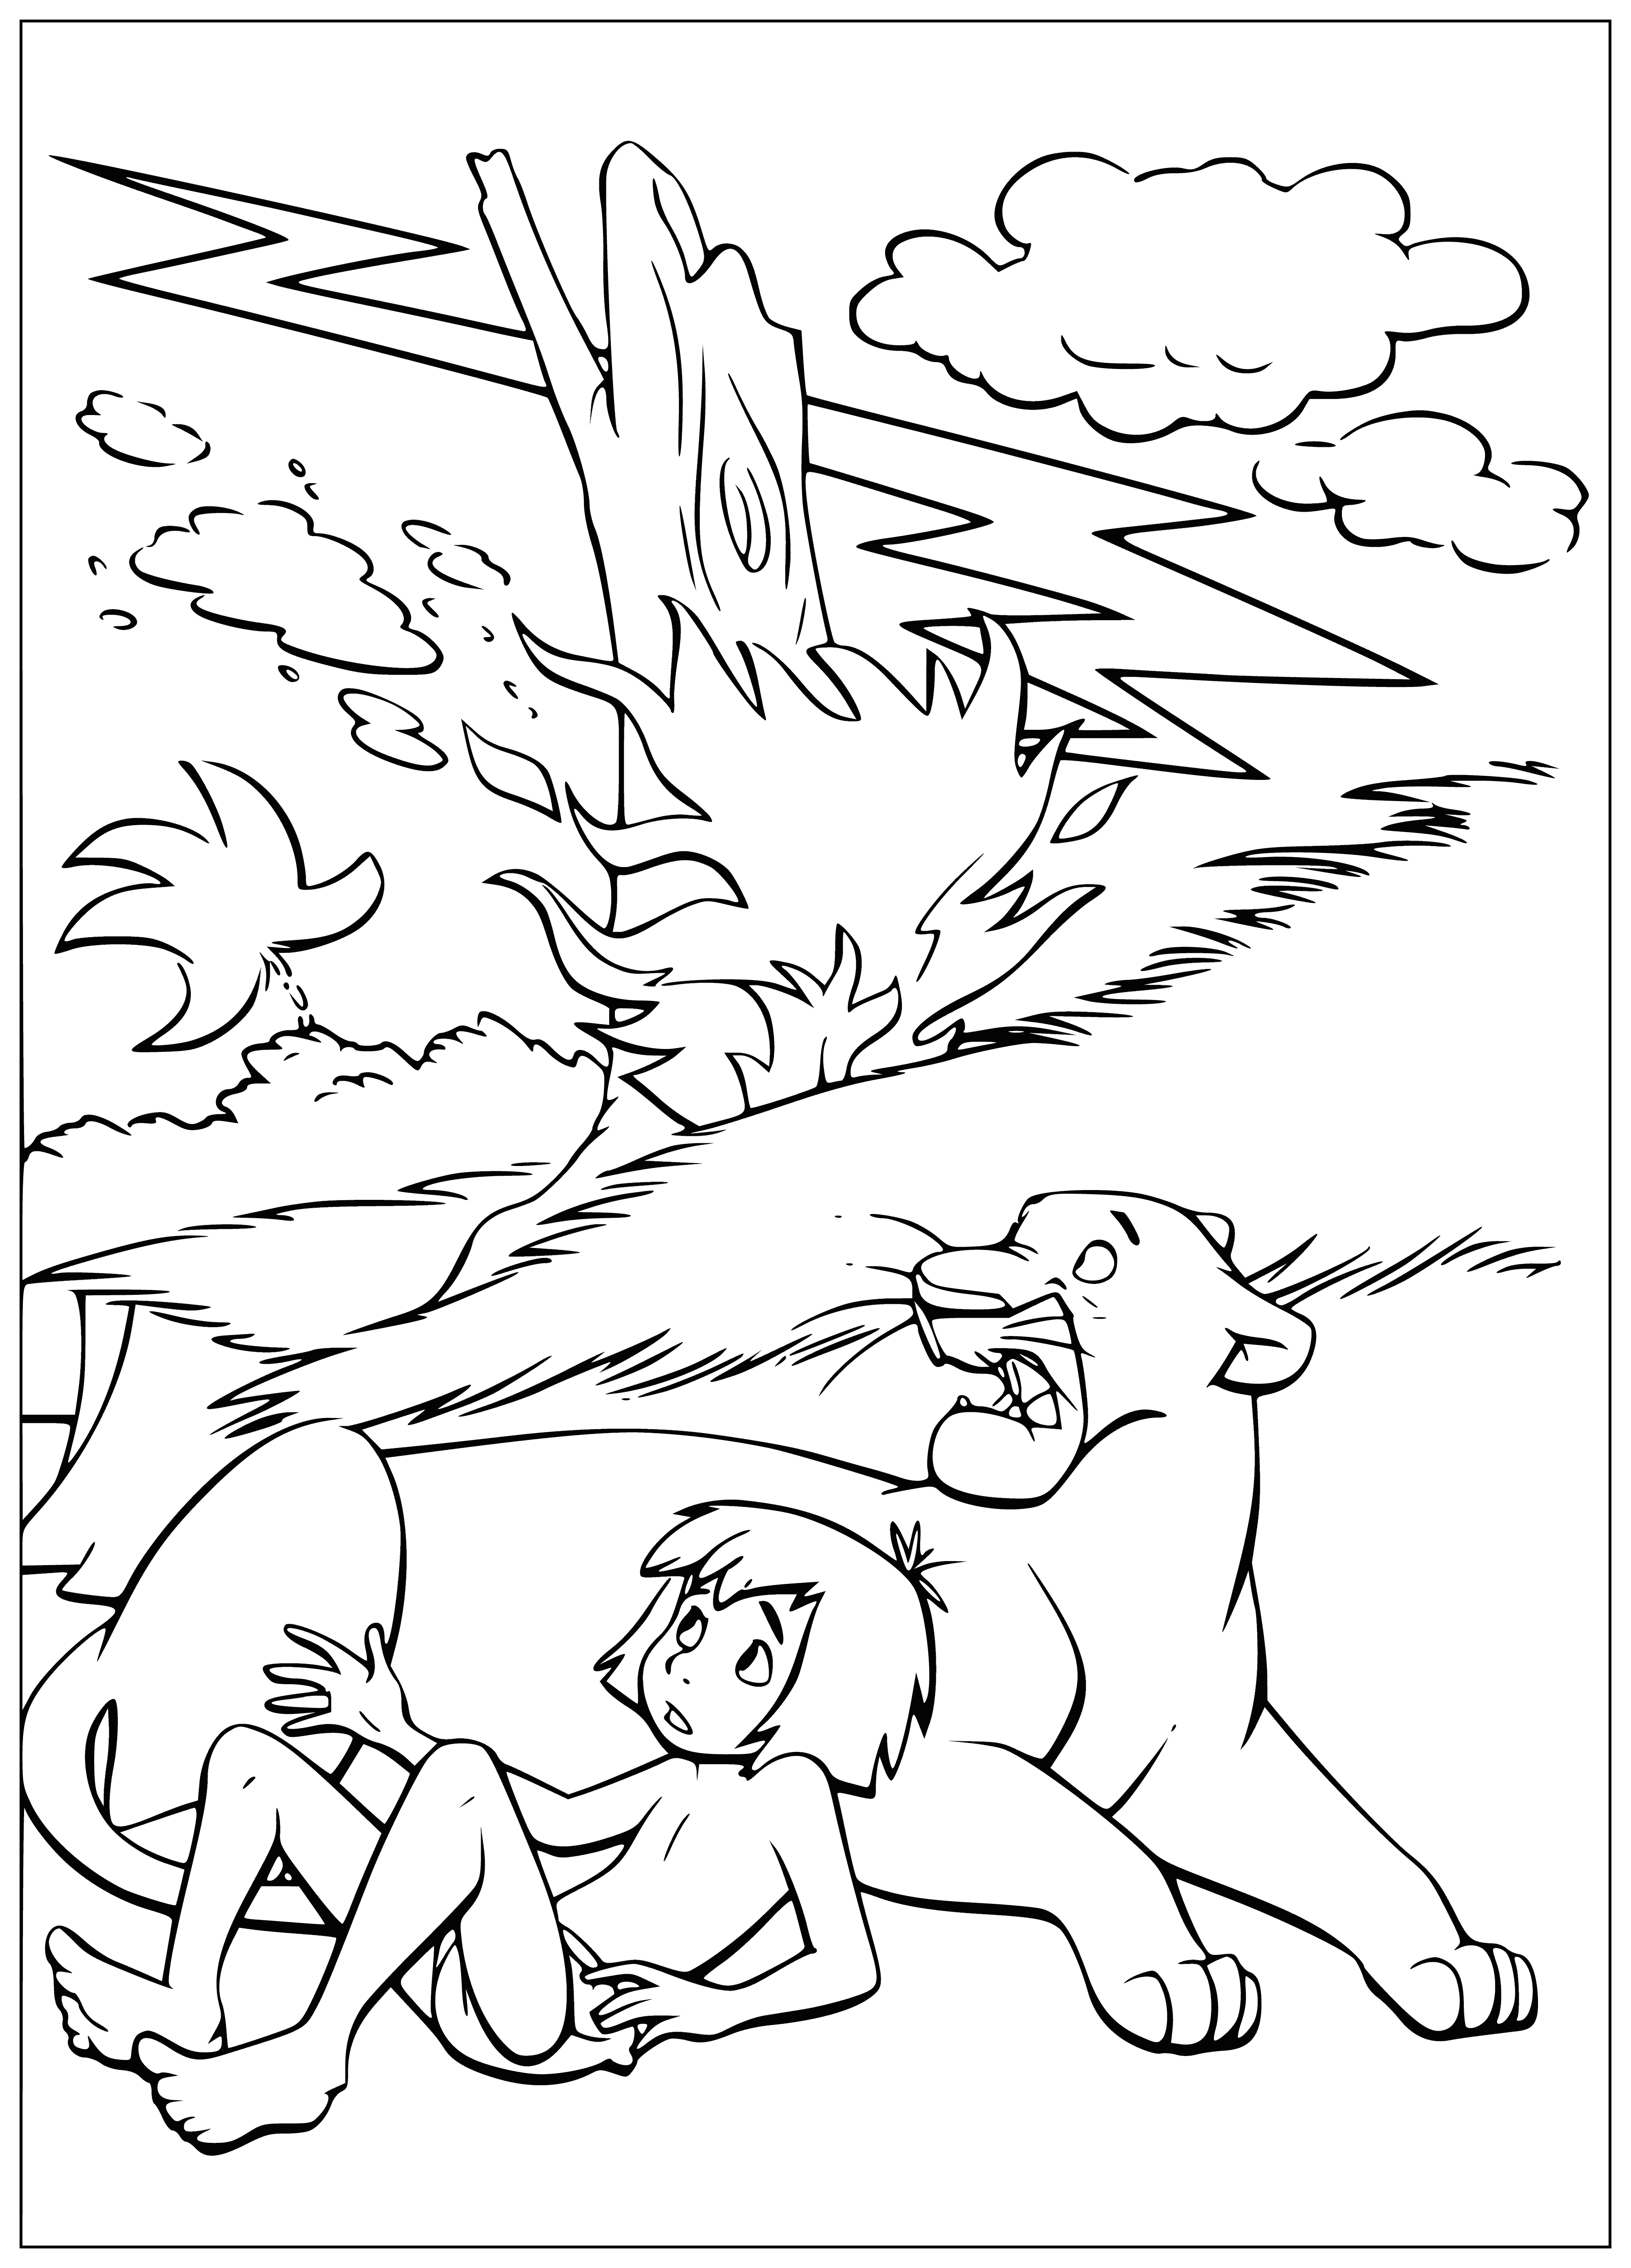 Lightning into a tree coloring page